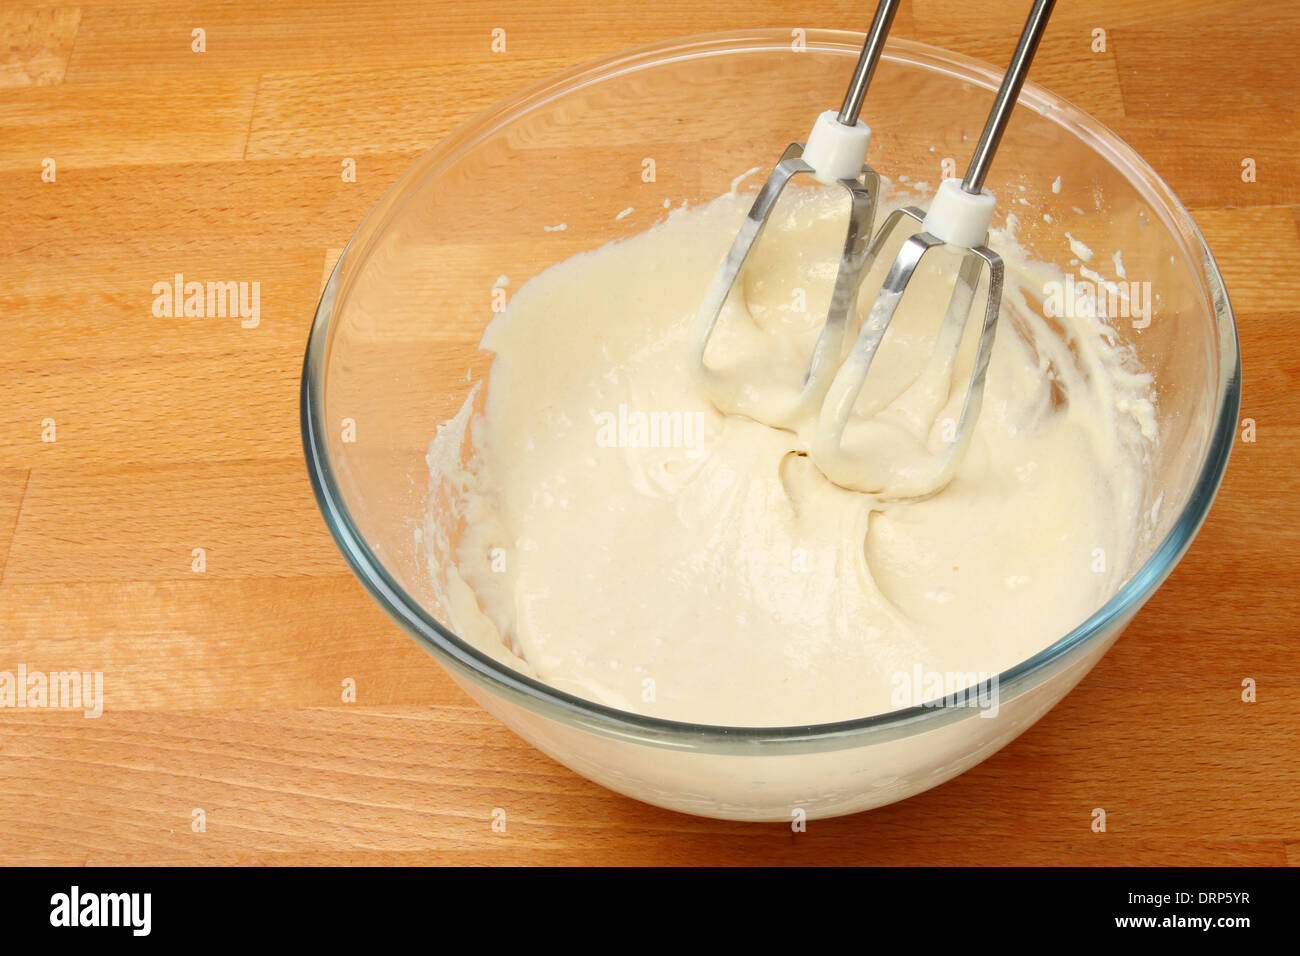 Cake mix in a glass mixing bowl with a whisk on a wooden worktop Stock Photo